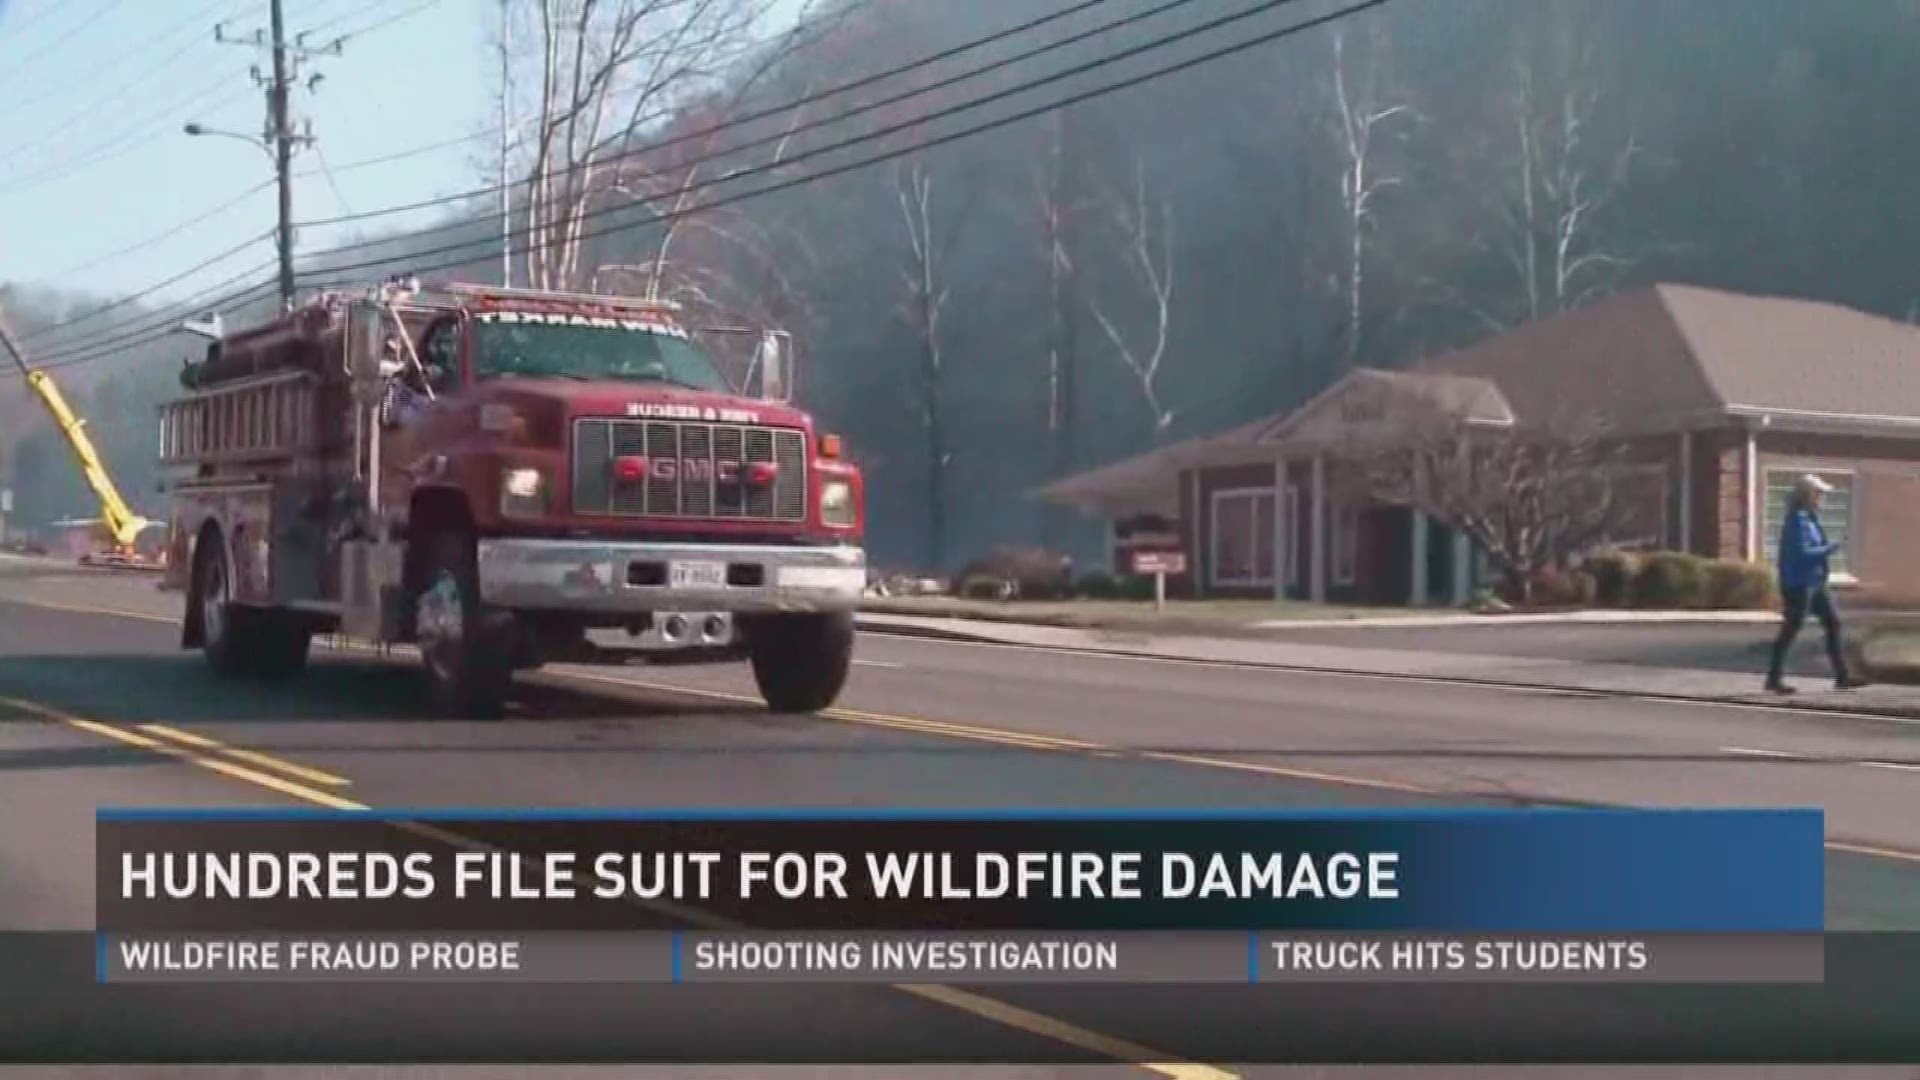 Sept. 1, 2017: A Knoxville attorney says he represents roughly 200 people who plan to file lawsuits against the U.S. Department of the Interior for negligence in the Sevier County wildfires.